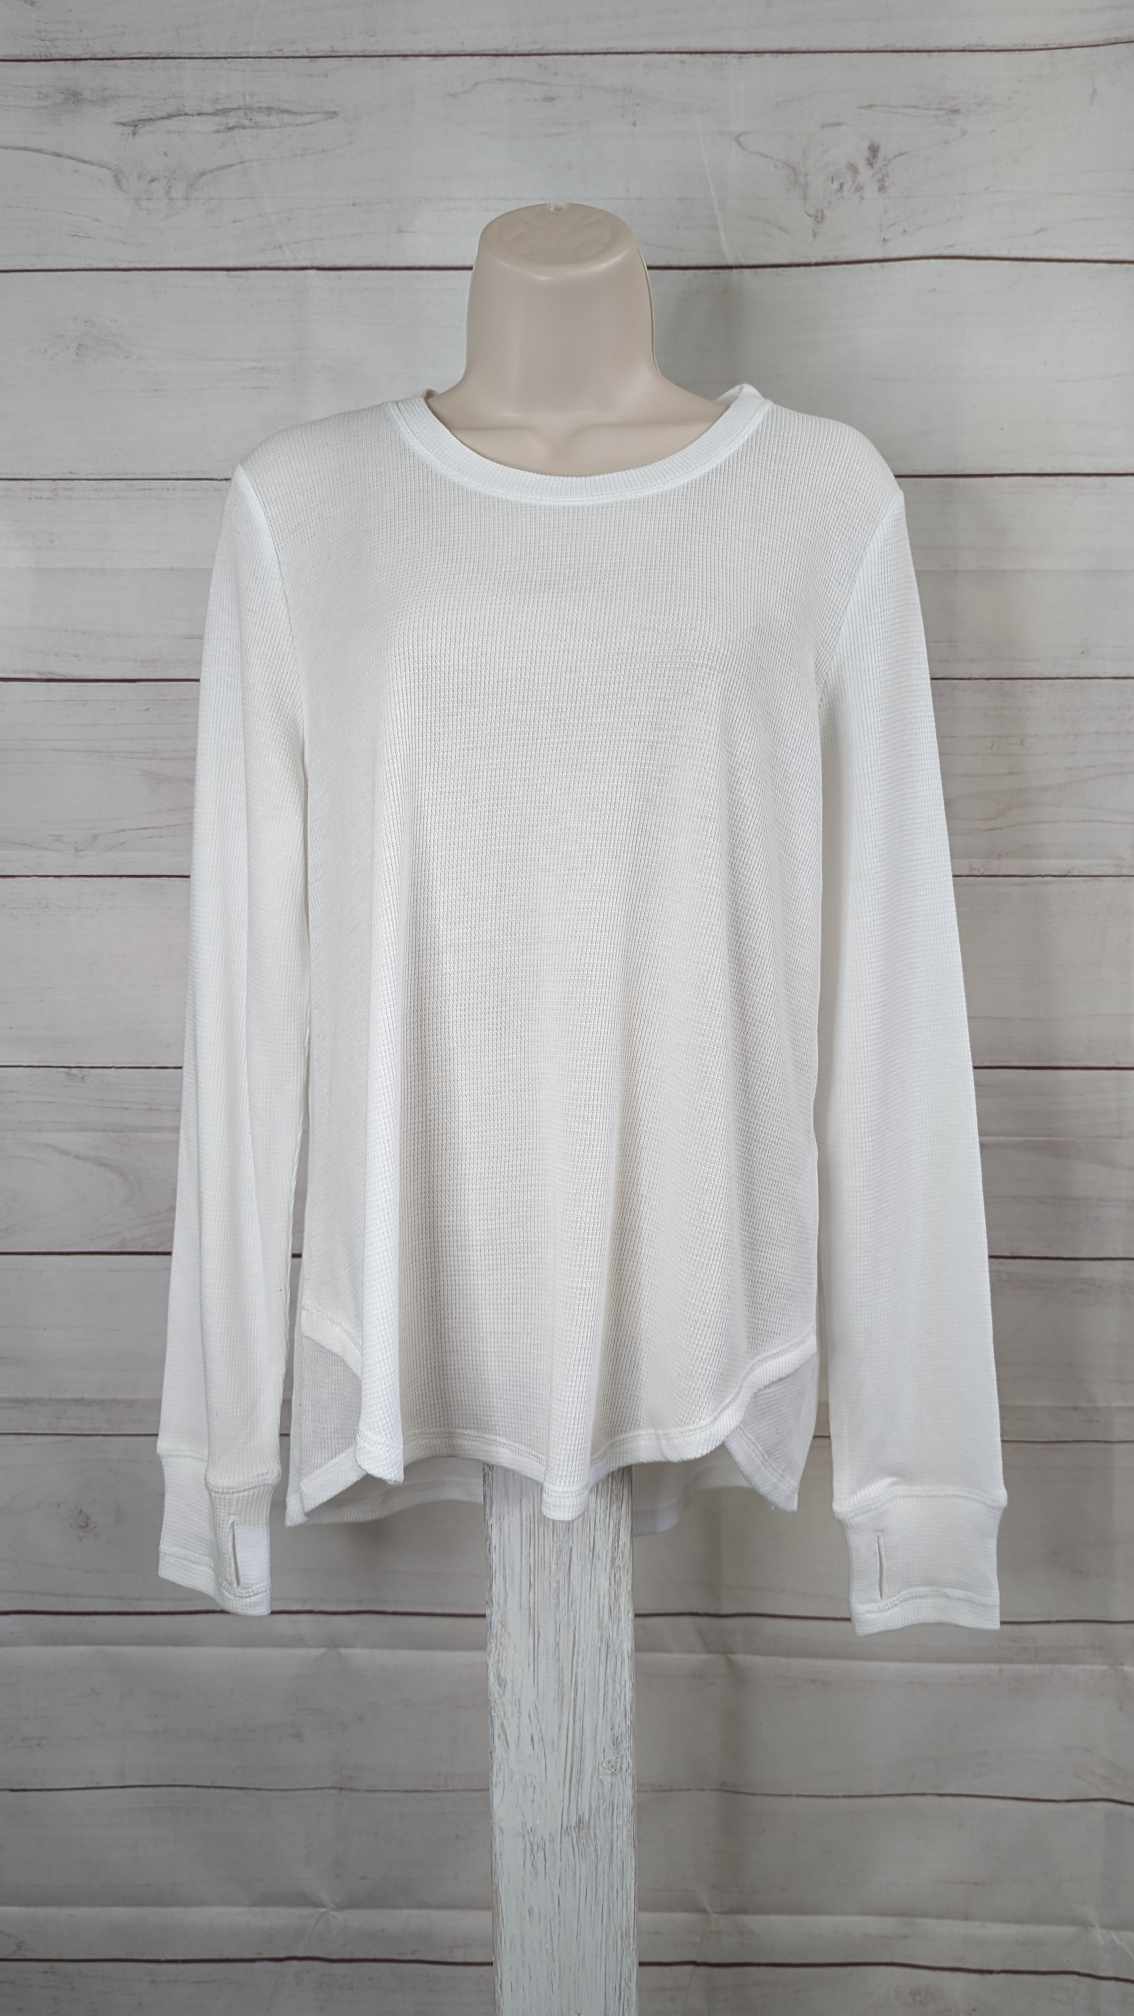 LARGE PEARL A463117 Susan Graver SG Sport Thermal Knit Top with Thumbhole Detail